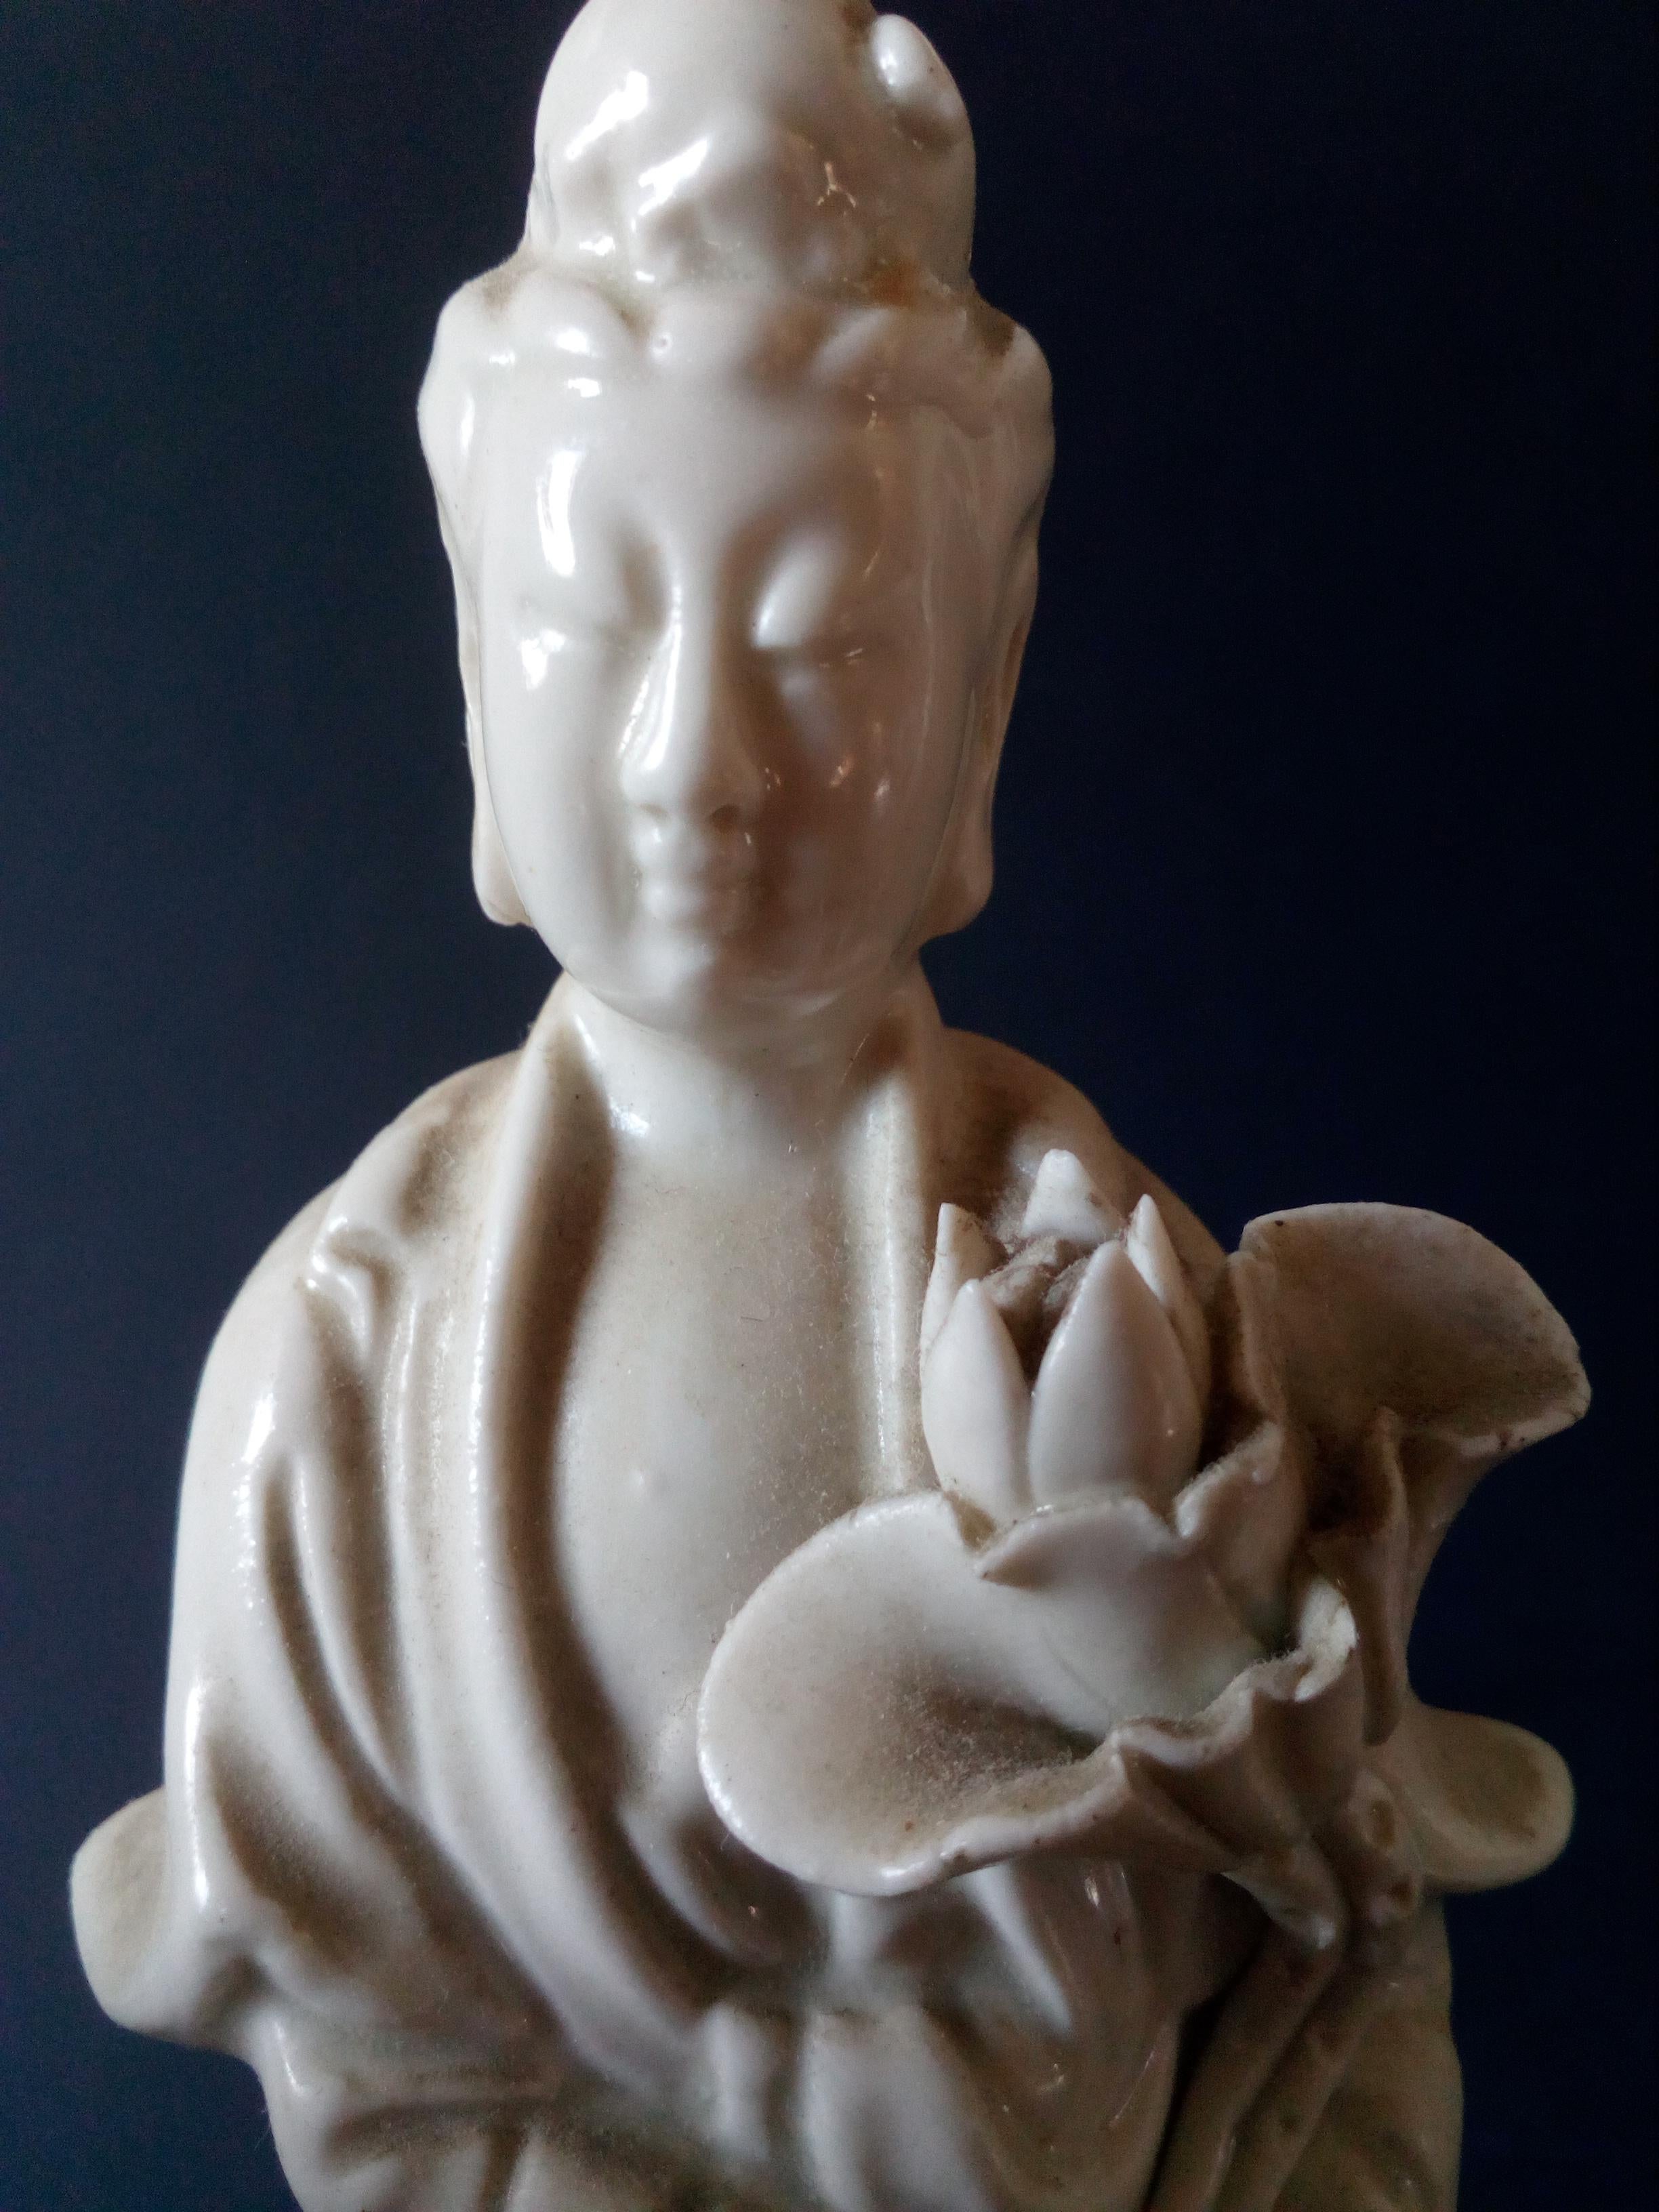 A figurine in hard porcelain blanche de chine, image of the floating Buddha bearing decorations with lotus flowers.
Non-glazed base.
Early 20th century.
Quantity 1
Measures: Height 12 cm
Diameter 6 cm.